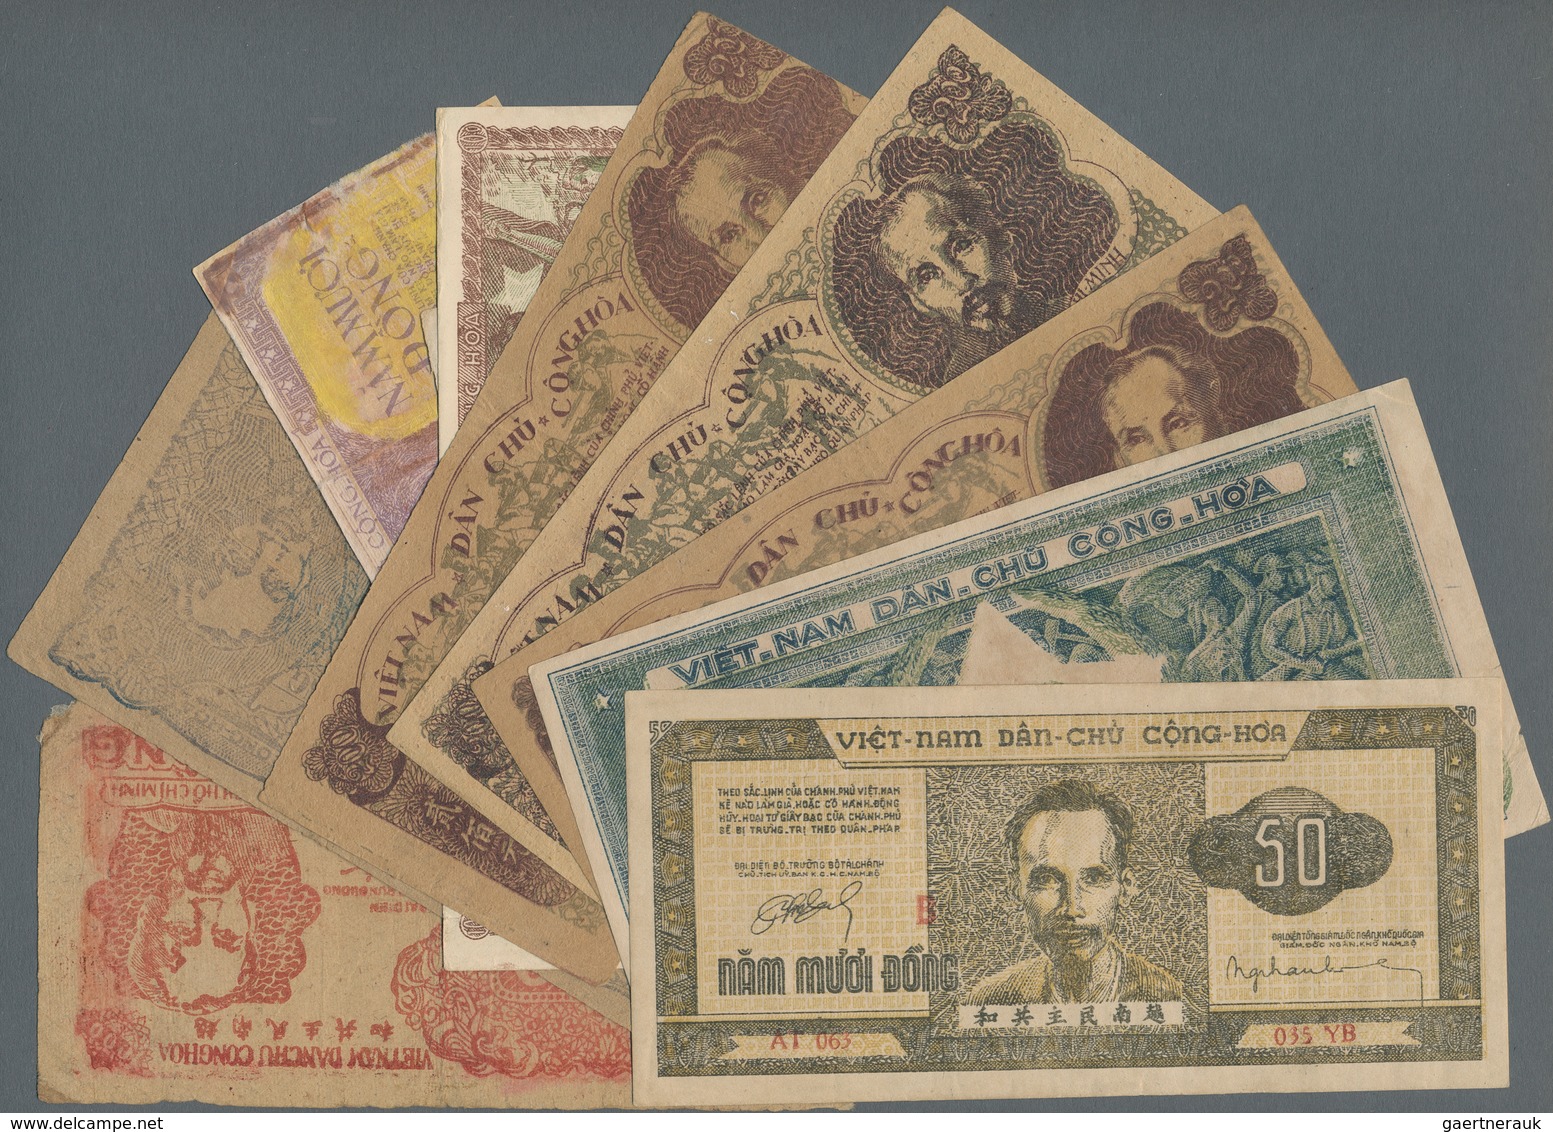 Vietnam: Nice Lot With 11 Banknotes Of The 1950's Series Comprising 2 X 50 Dong 1950 P.32 In VF/aUNC - Vietnam